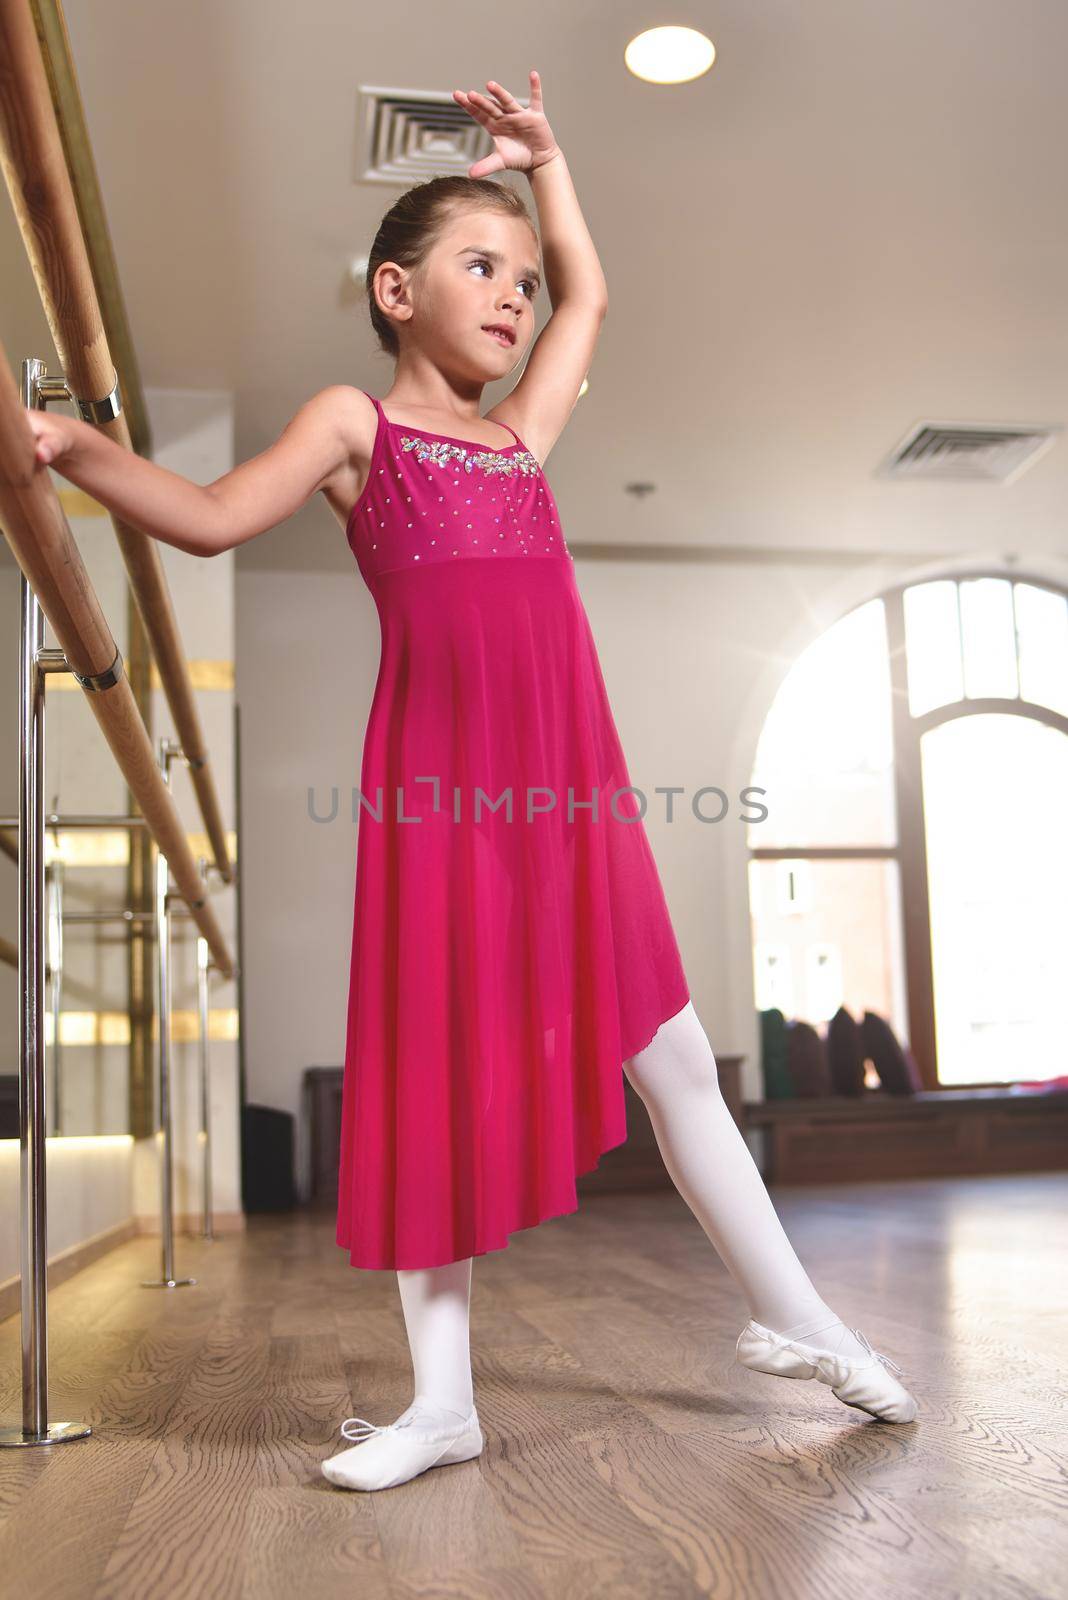 charming little girl dreams of becoming a ballerina. The girl in the pink dress is dancing, holding on to the bar.Baby girl is studying ballet. by Nickstock